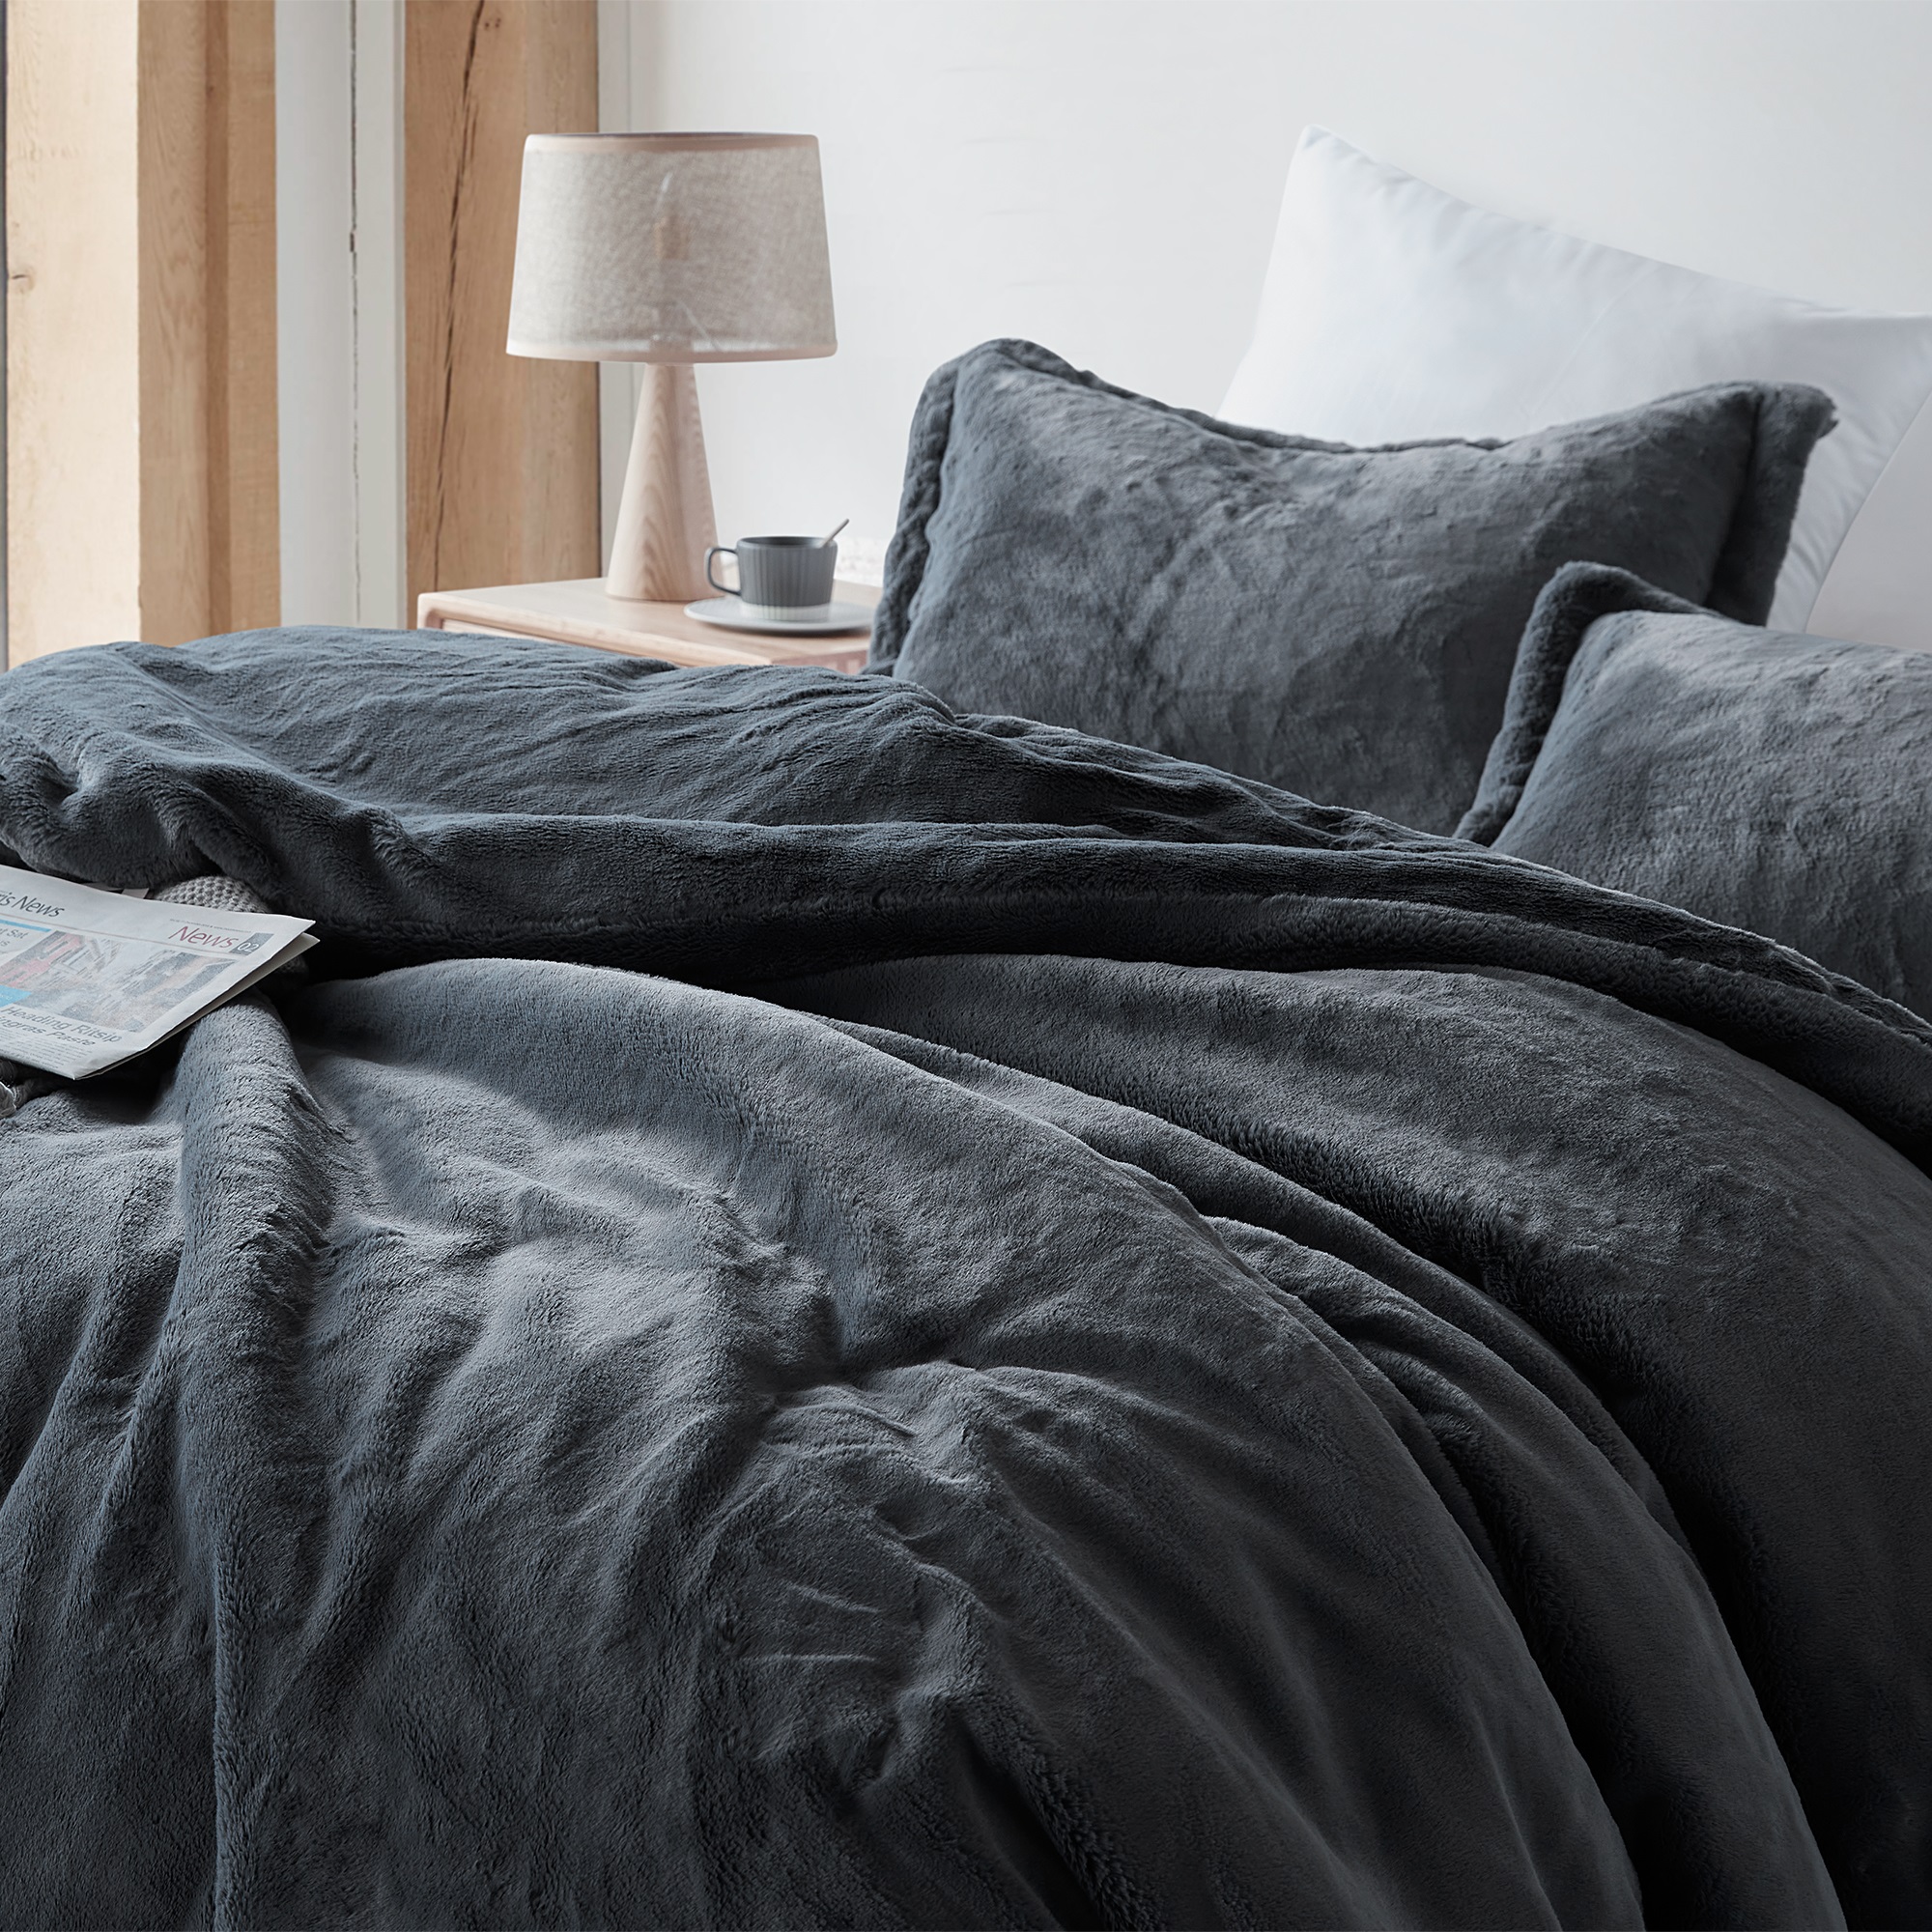 Chunky Bunny - Coma Inducer Oversized Comforter - Faded Black